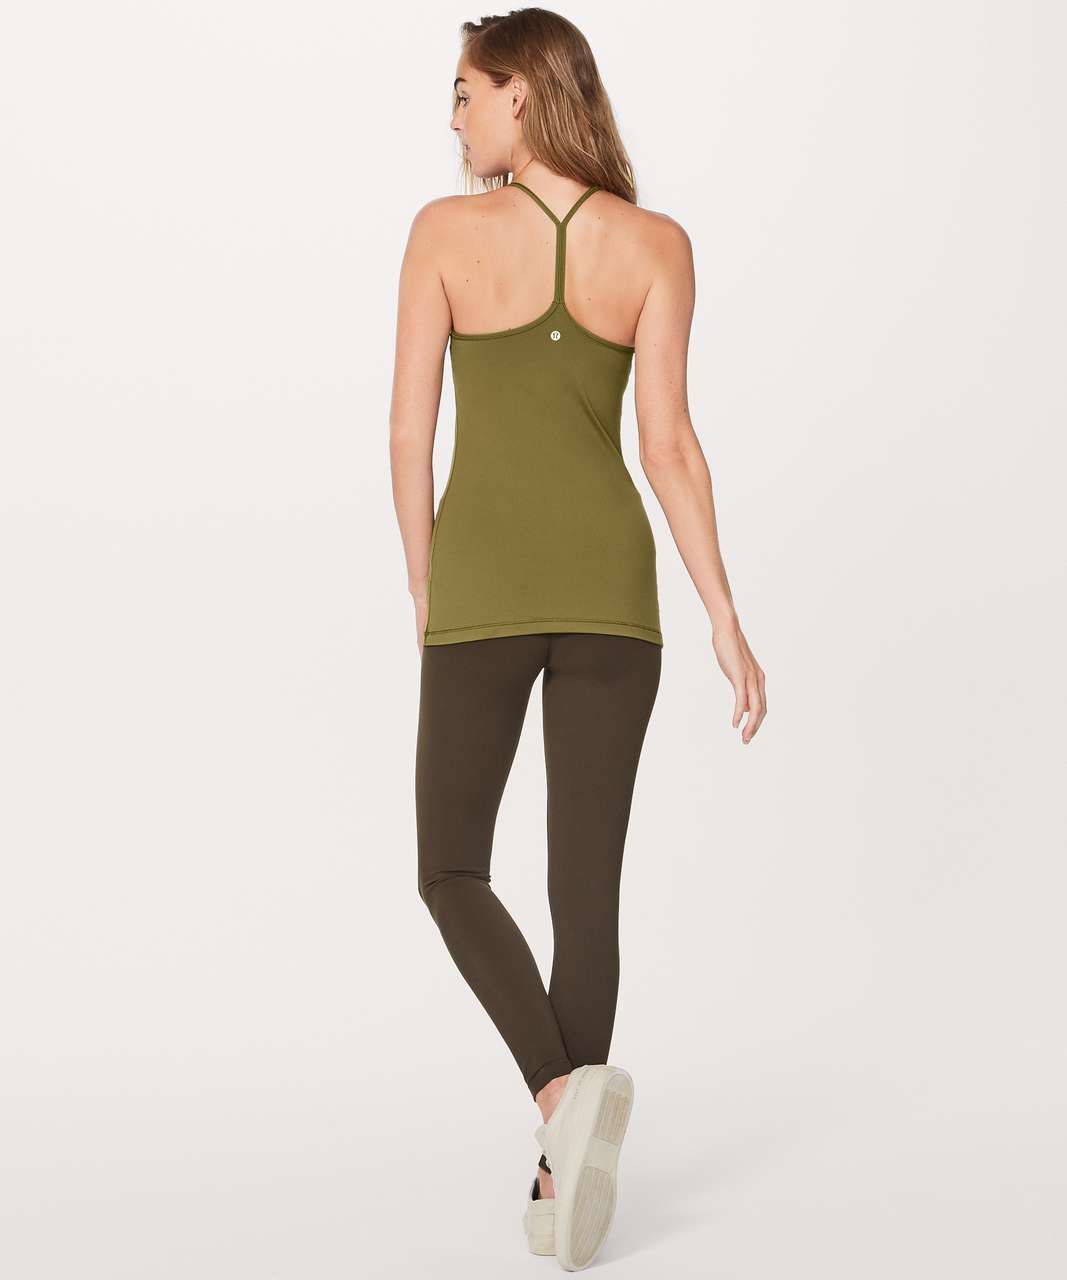 Lululemon Power Pose Tank *Light Support For A/B Cup - Meadow